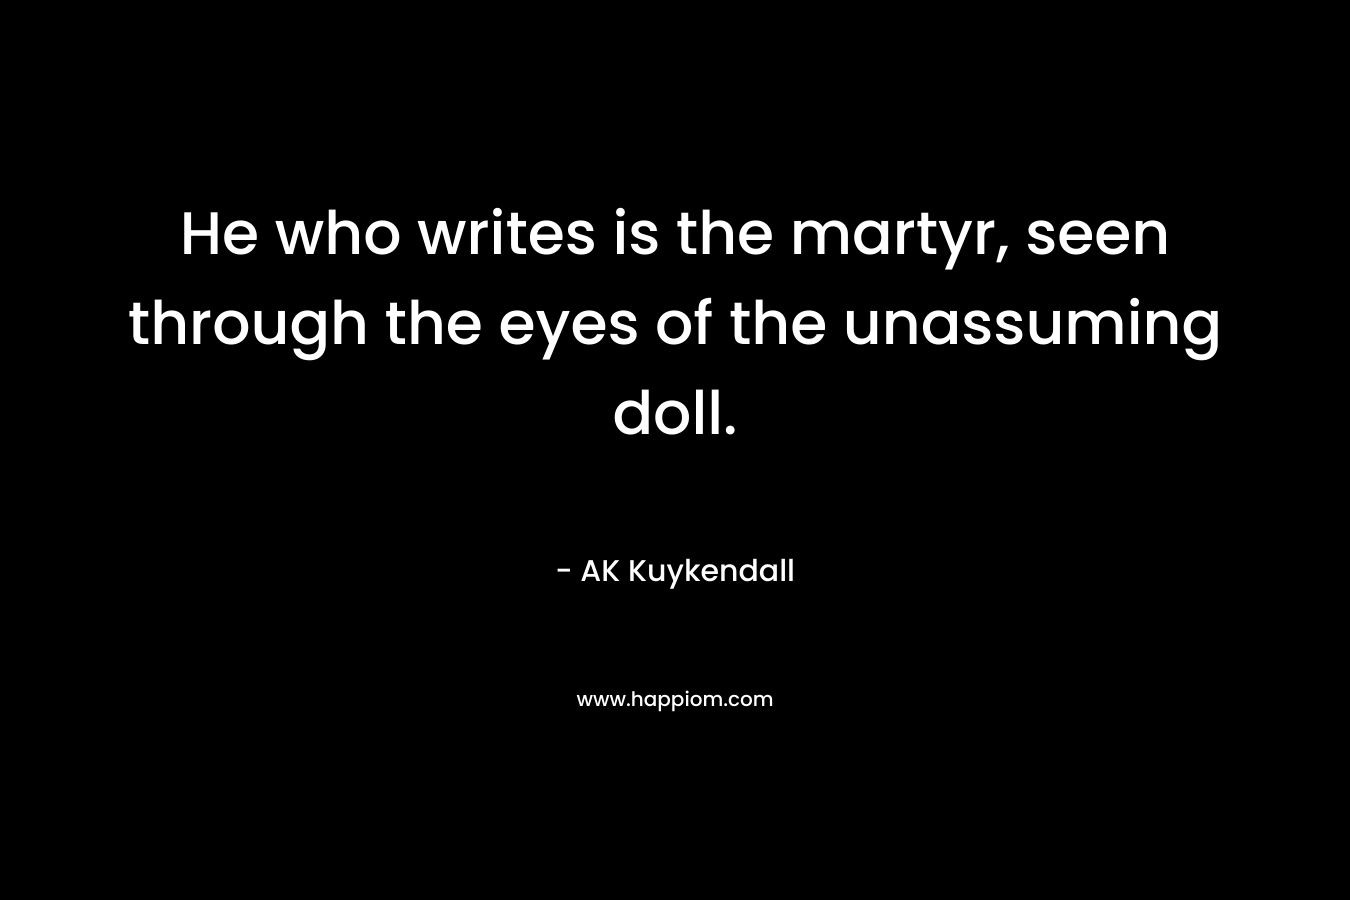 He who writes is the martyr, seen through the eyes of the unassuming doll. – AK Kuykendall